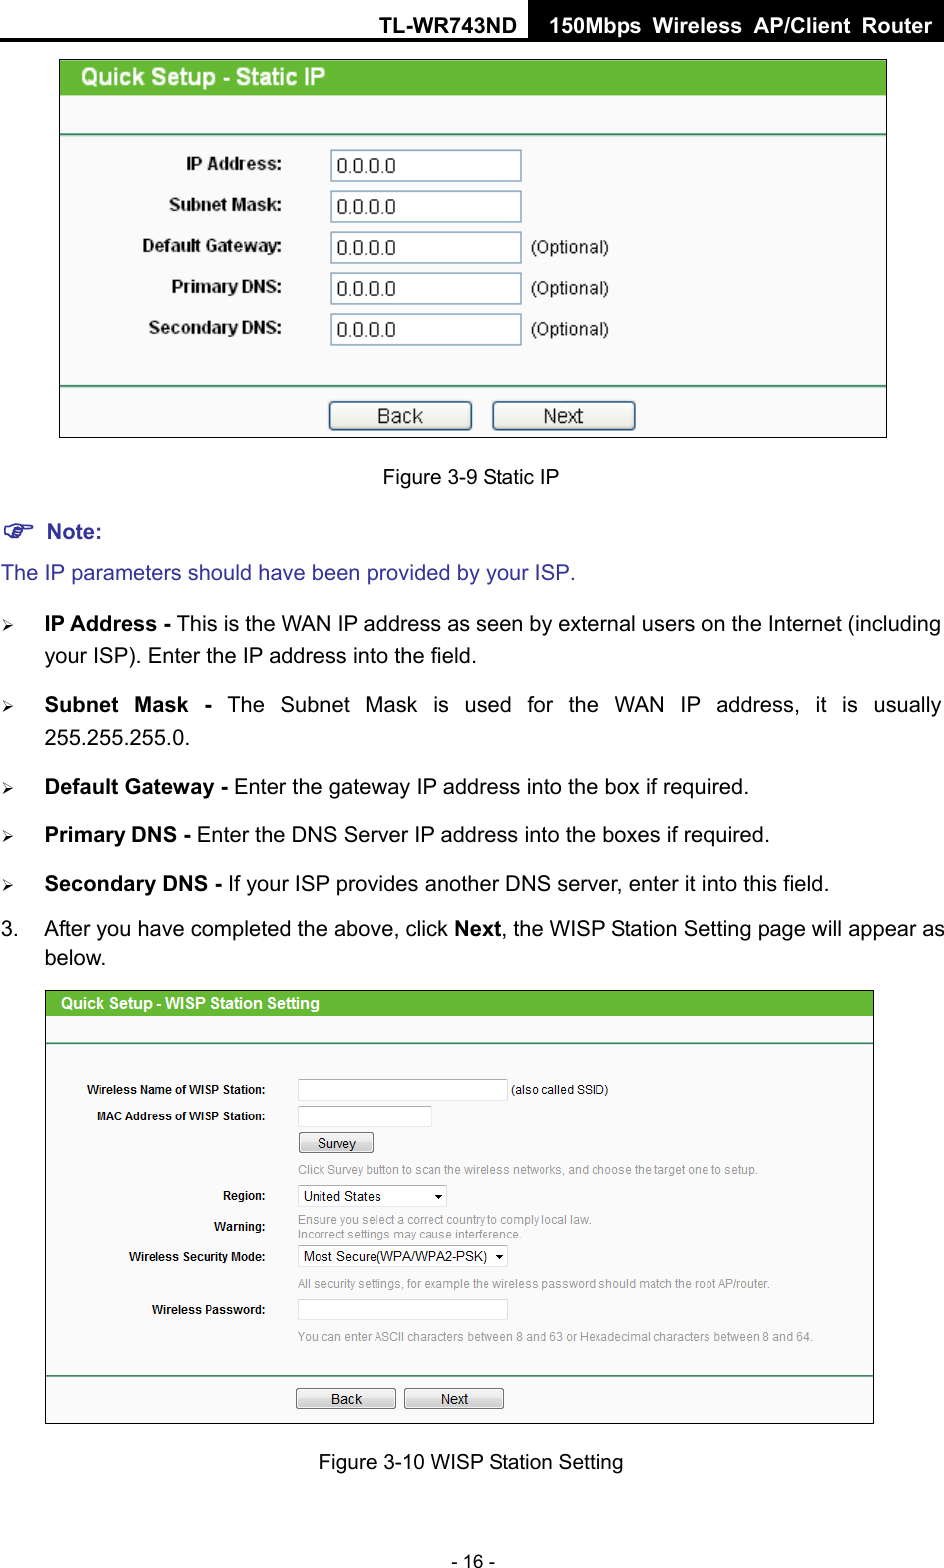 TL-WR743ND 150Mbps Wireless AP/Client Router - 16 -  Figure 3-9 Static IP  Note: The IP parameters should have been provided by your ISP.  IP Address - This is the WAN IP address as seen by external users on the Internet (including your ISP). Enter the IP address into the field.  Subnet Mask - The Subnet Mask is used for the WAN IP address, it is usually 255.255.255.0.  Default Gateway - Enter the gateway IP address into the box if required.  Primary DNS - Enter the DNS Server IP address into the boxes if required.  Secondary DNS - If your ISP provides another DNS server, enter it into this field. 3.  After you have completed the above, click Next, the WISP Station Setting page will appear as below.  Figure 3-10 WISP Station Setting 